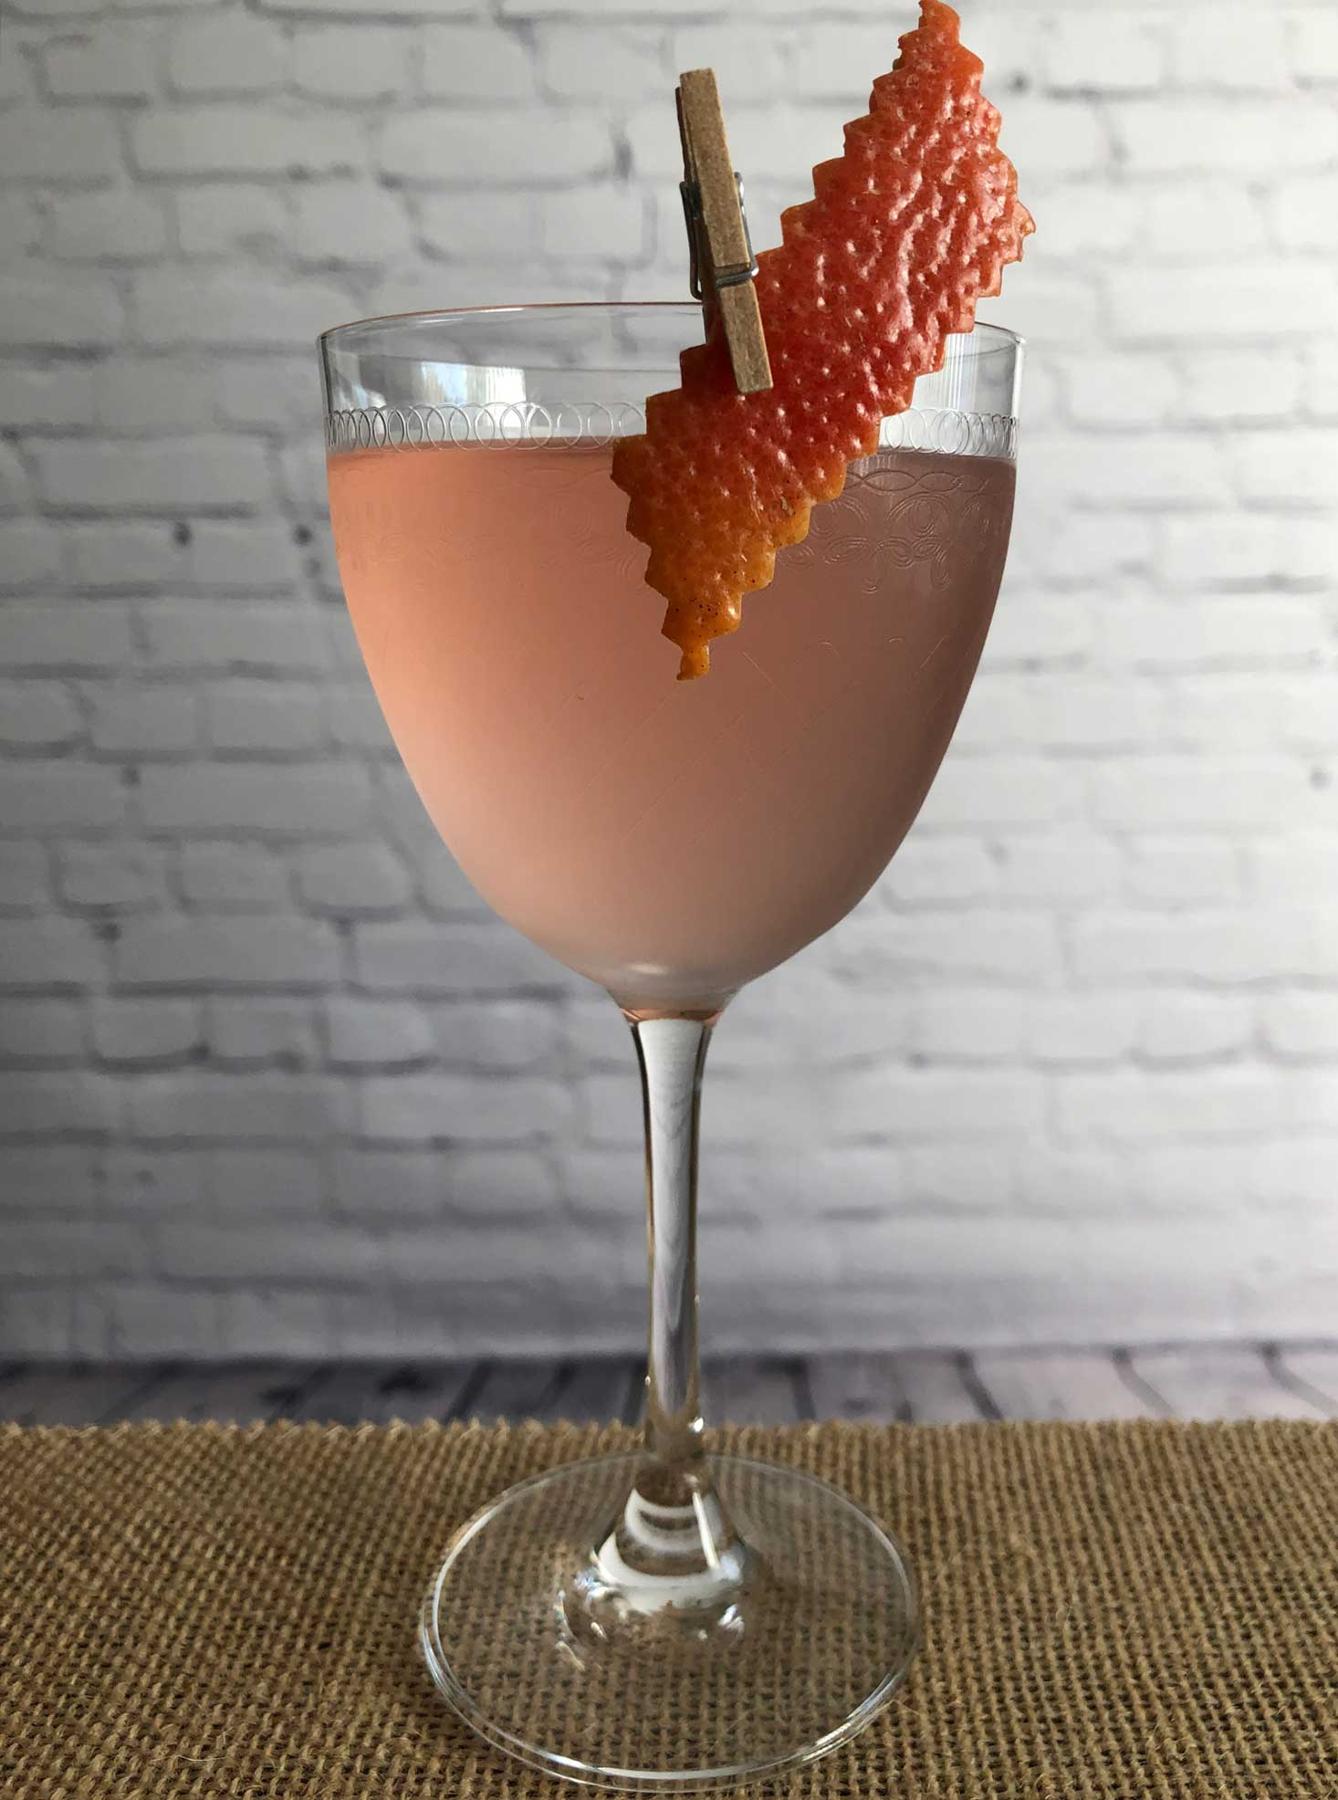 An example of the Alpen Rose, the mixed drink (drink), by Lee Edwards, featuring Dolin Dry Vermouth de Chambéry, Blume Marillen Apricot Eau-de-Vie, Cocchi Americano Rosa, simple syrup, and grapefruit twist; photo by Lee Edwards